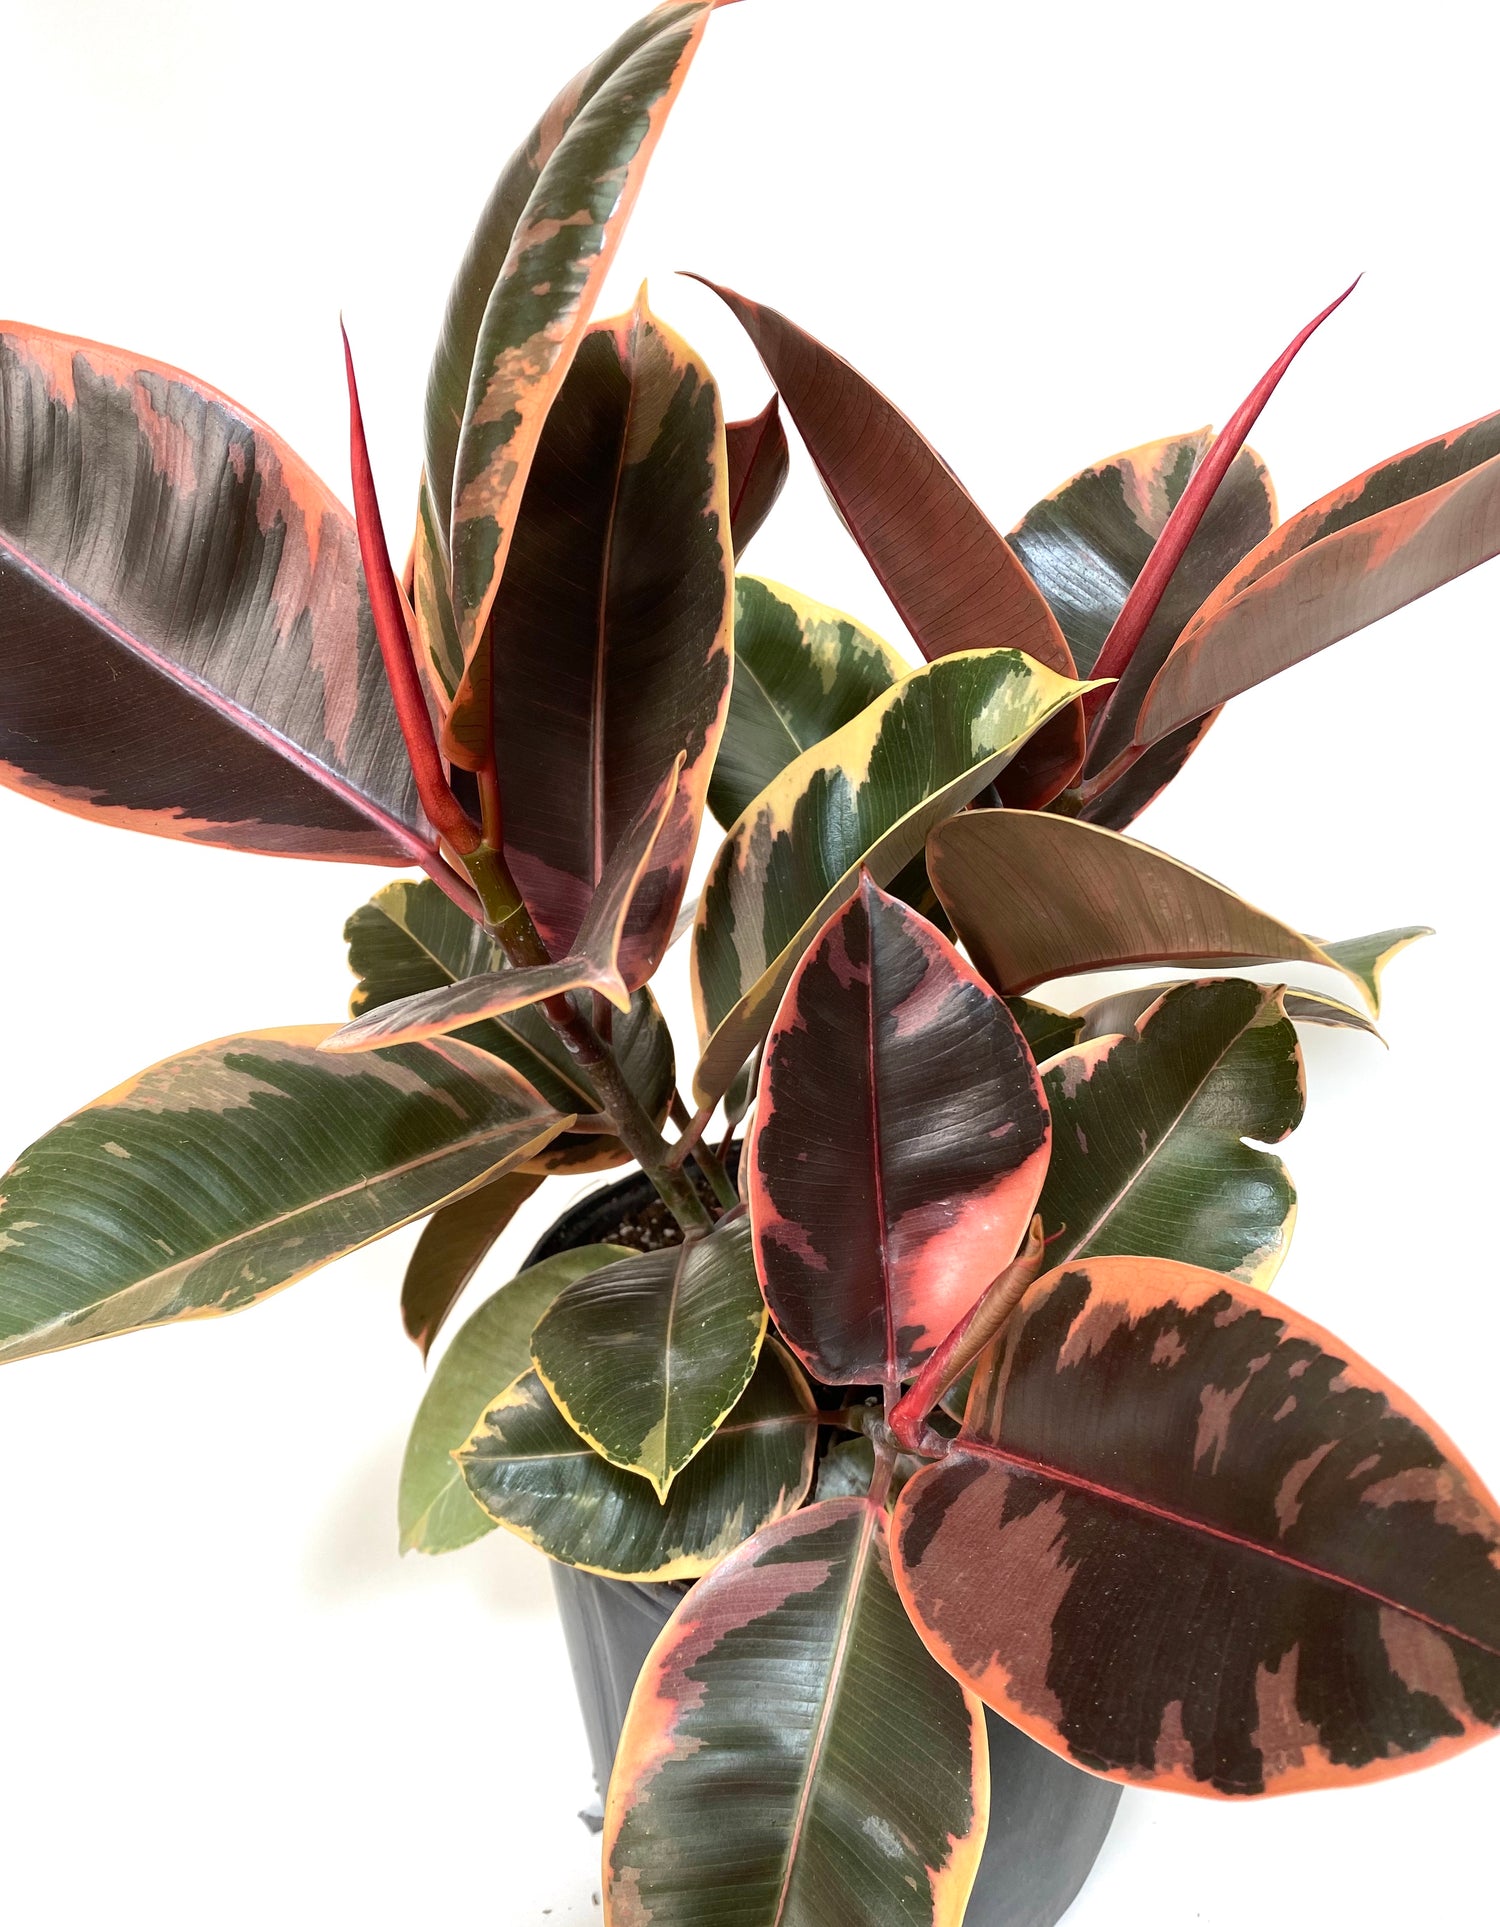 Top 5 Indoor Plants Recommended for Beginners from Greenery Experts.